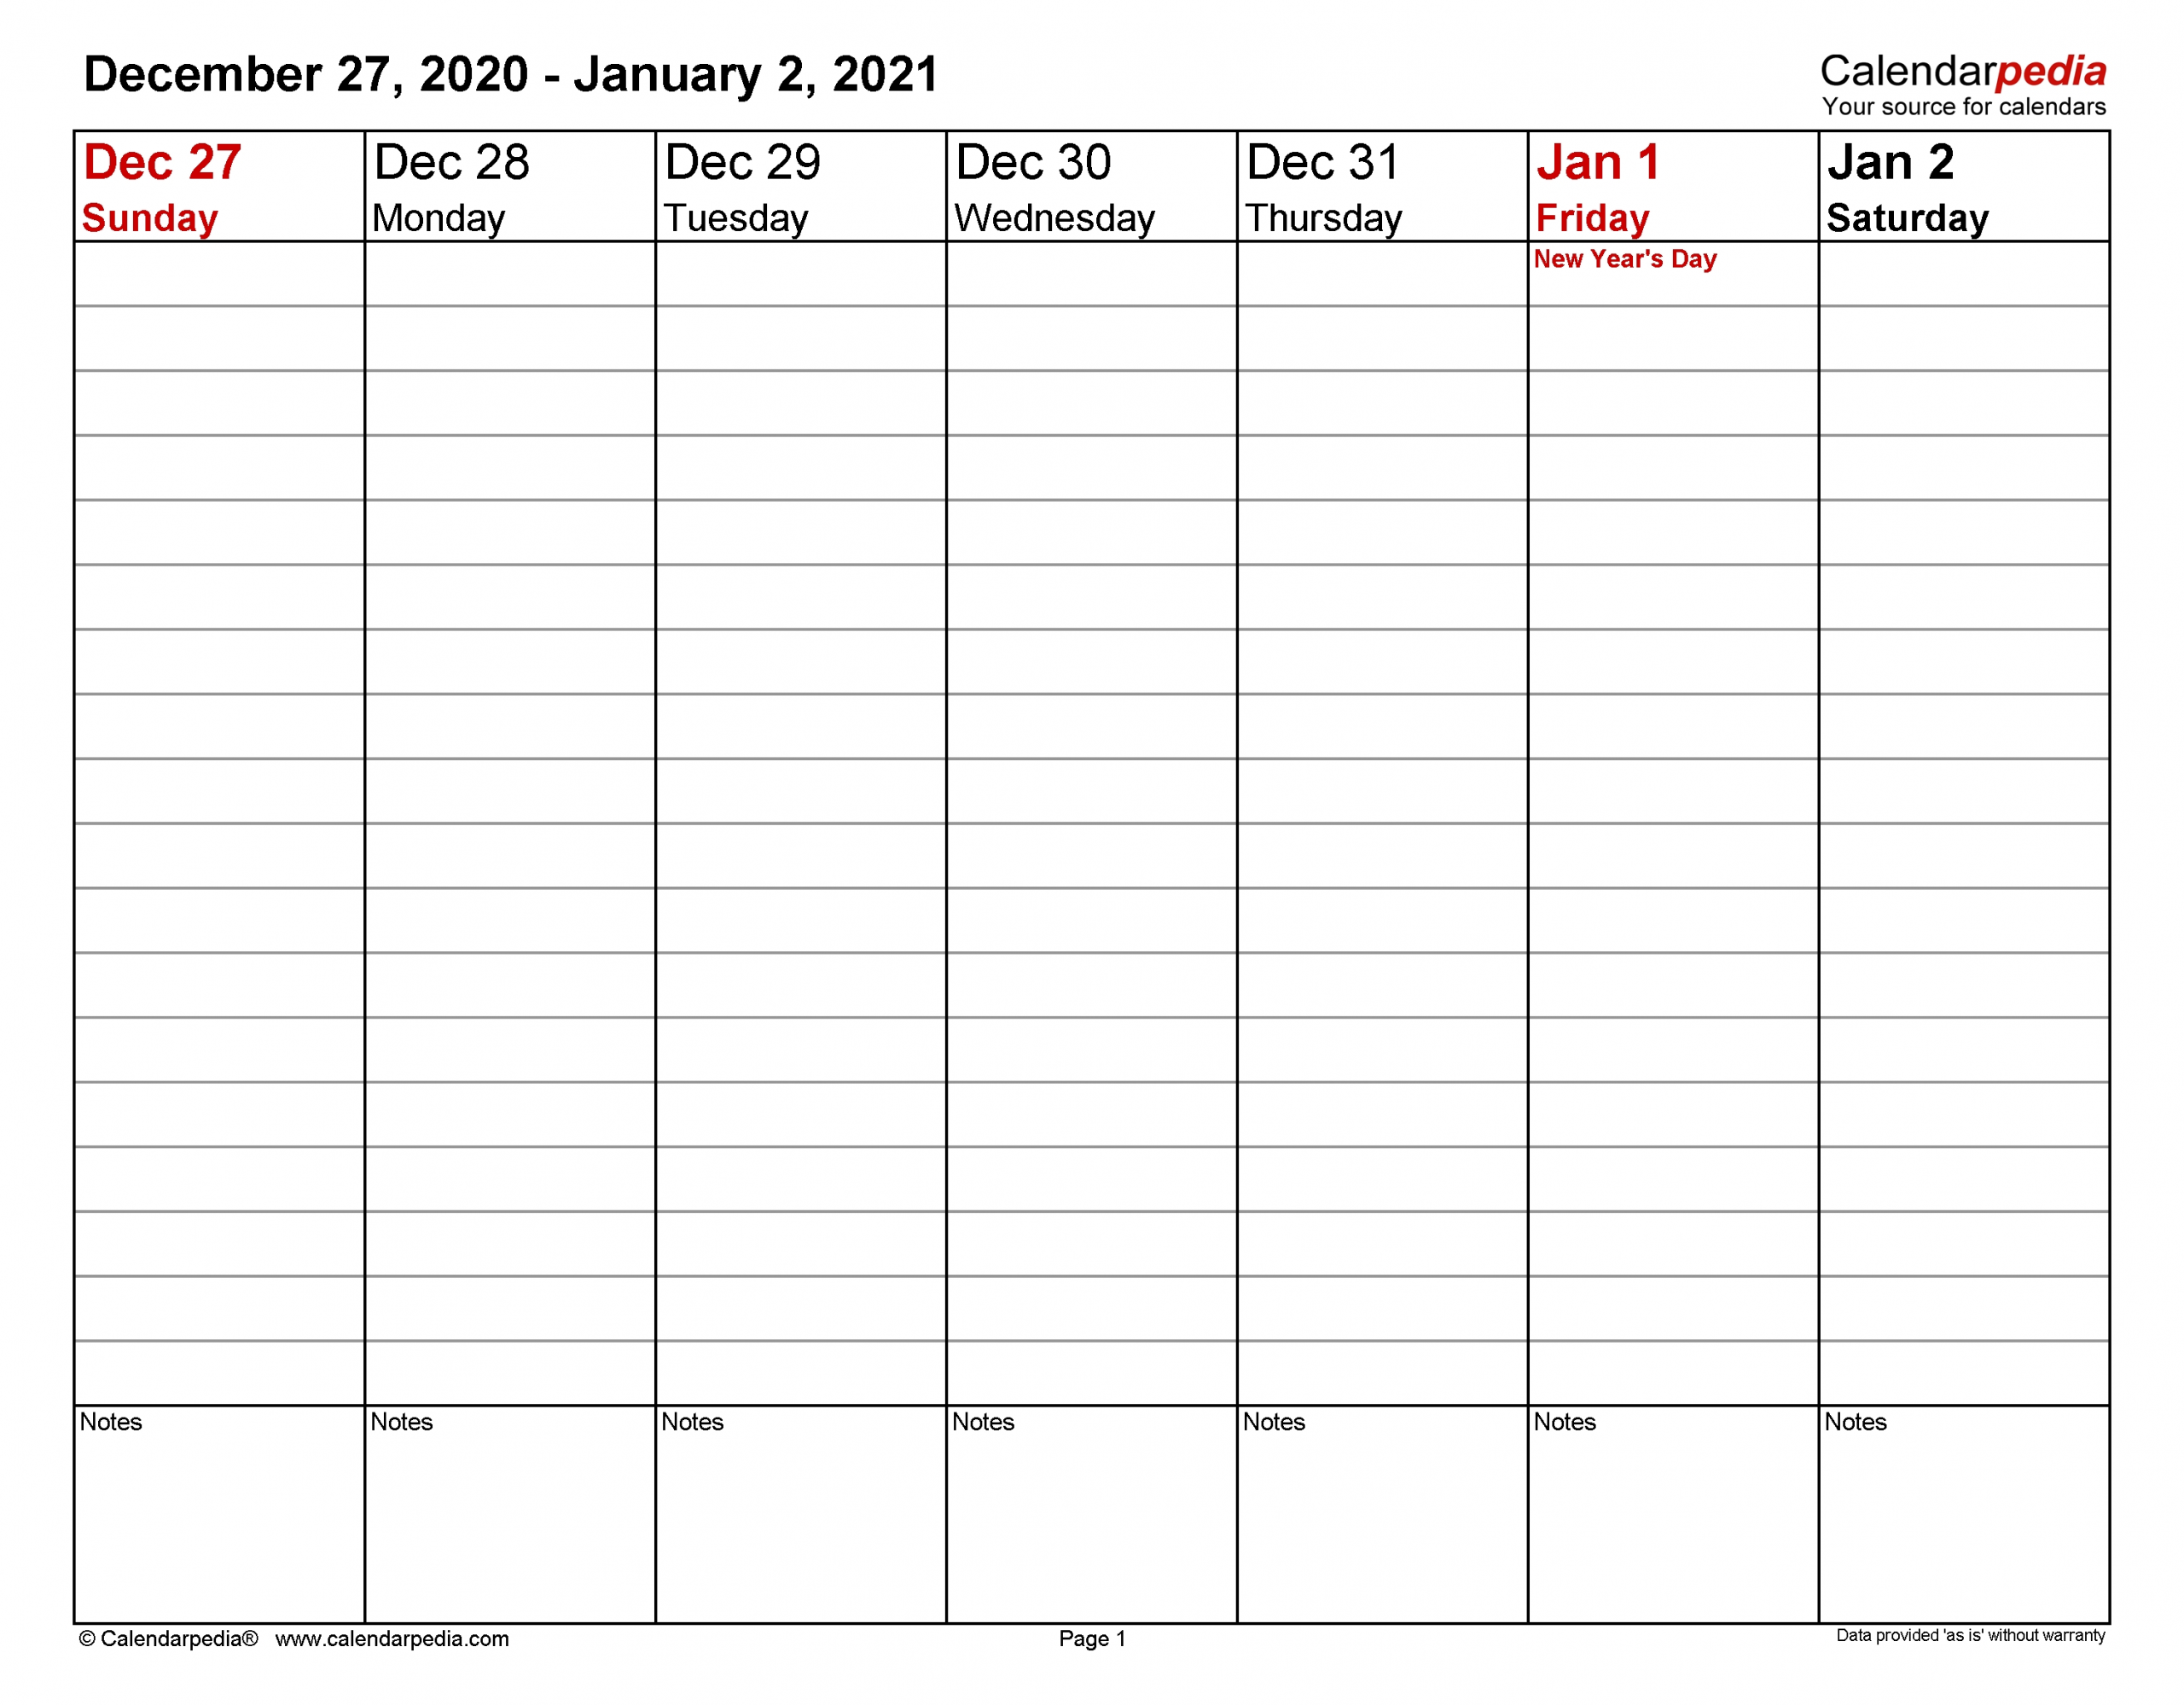 Weekly Calendars 2021 For Pdf - 12 Free Printable Templates